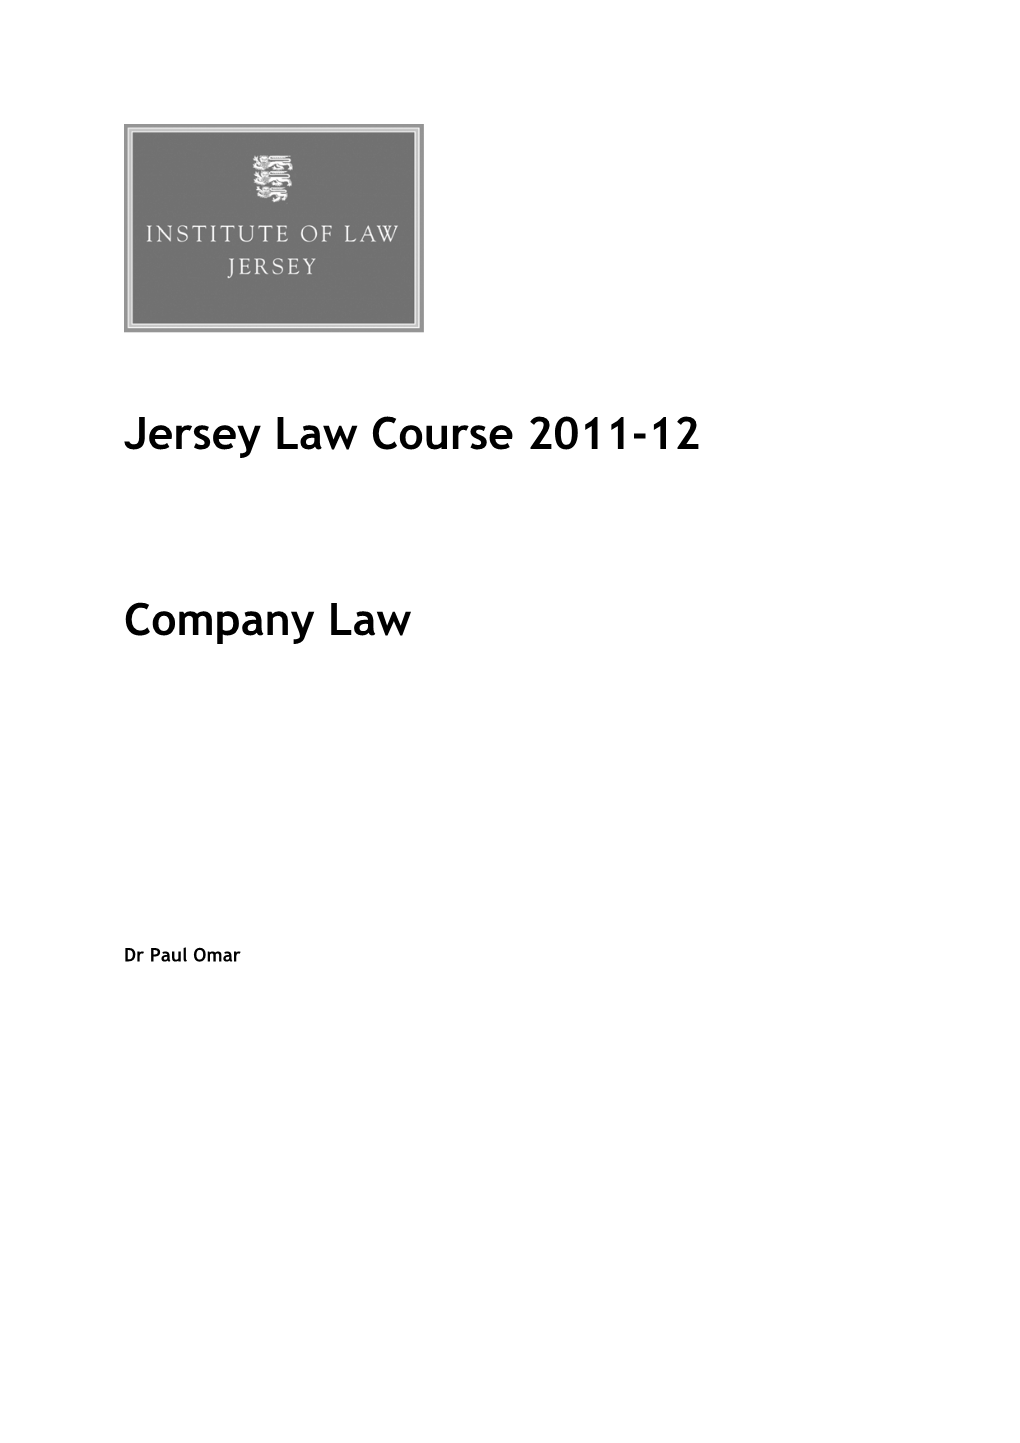 Jersey Law Course 2011-12 Company